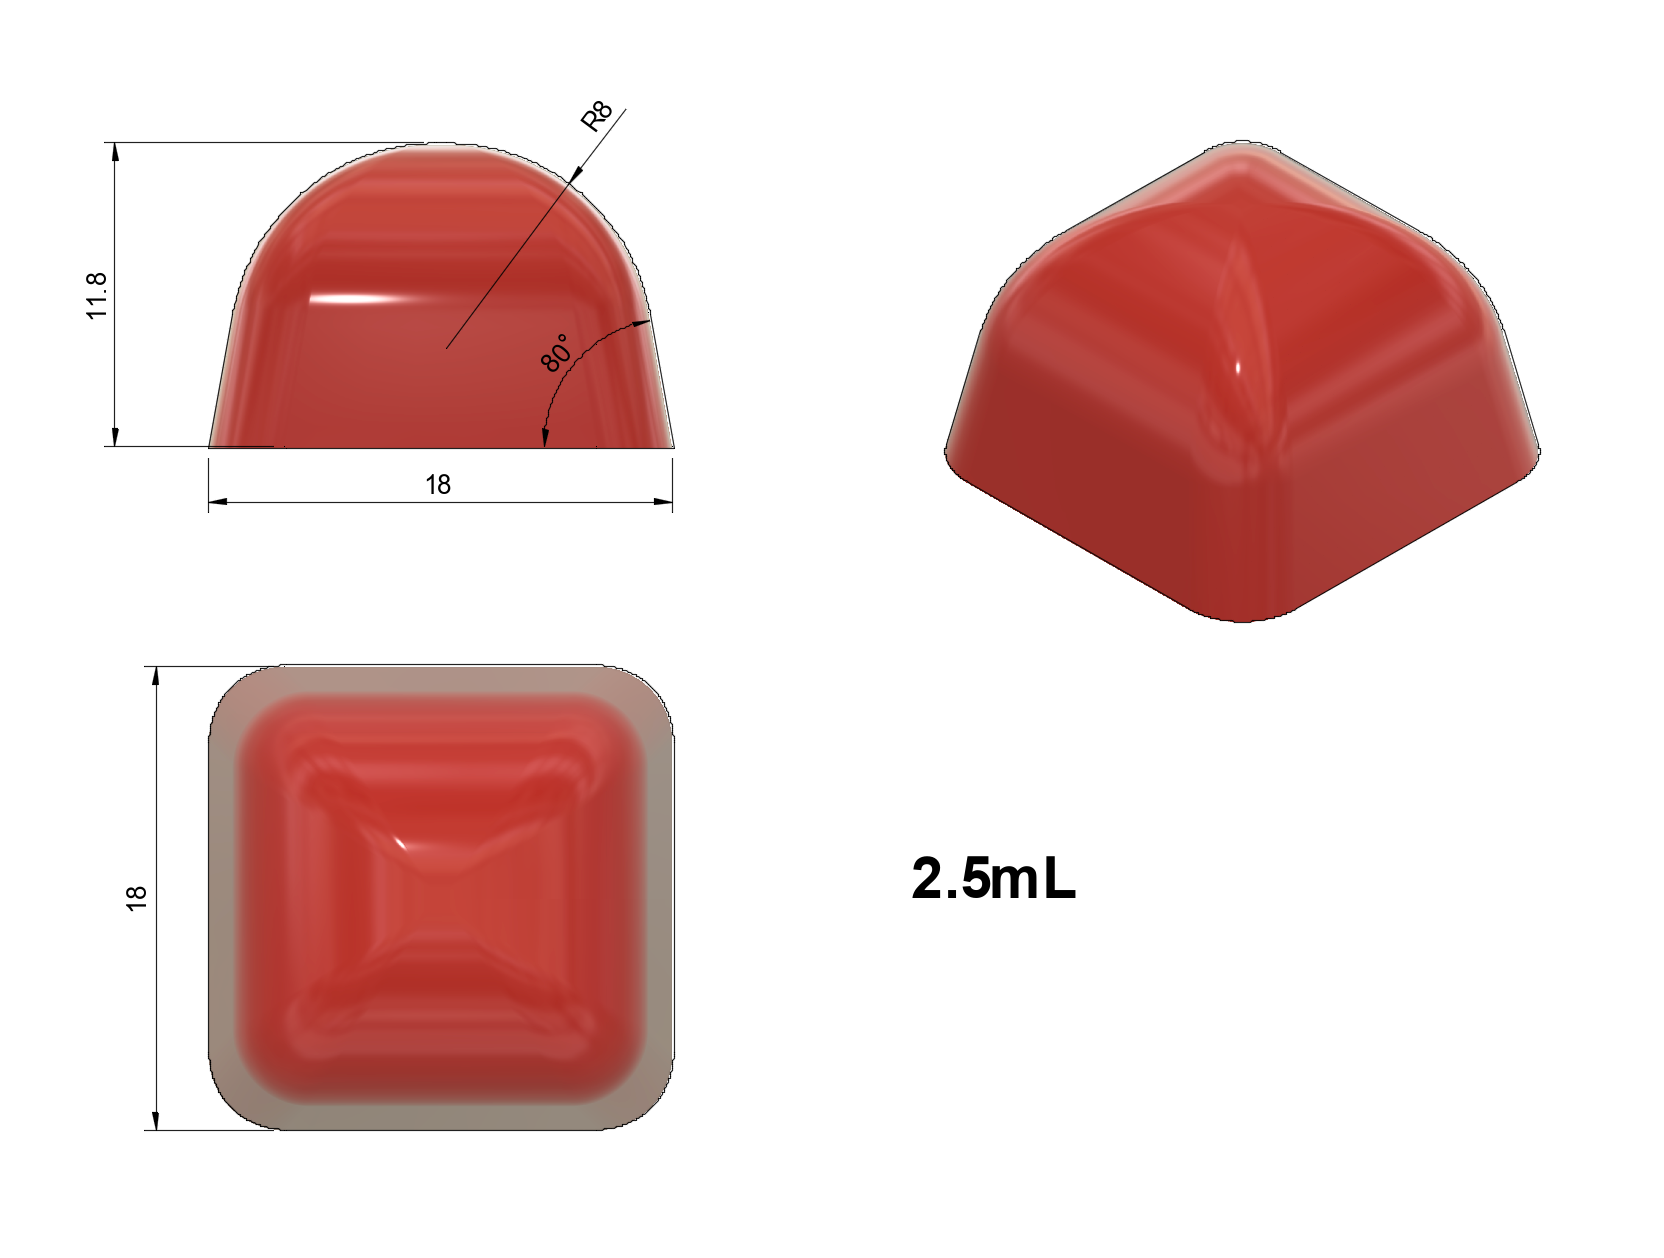 2.5 mL Rounded Top Square Mold - Baker Perkins Depositor - 198 Cavities